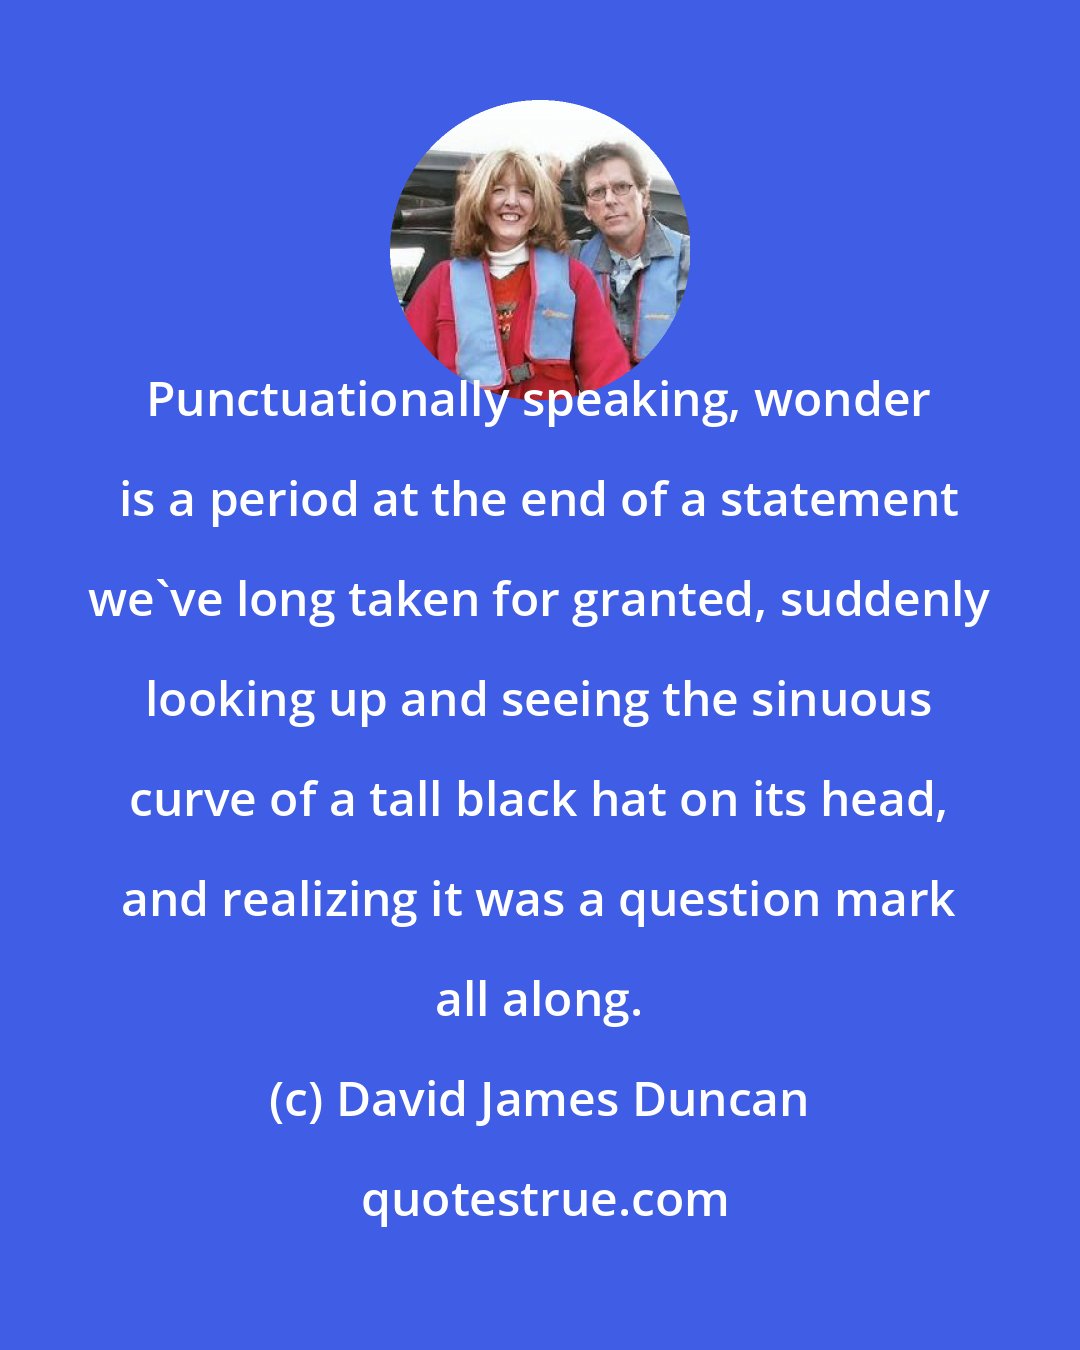 David James Duncan: Punctuationally speaking, wonder is a period at the end of a statement we've long taken for granted, suddenly looking up and seeing the sinuous curve of a tall black hat on its head, and realizing it was a question mark all along.